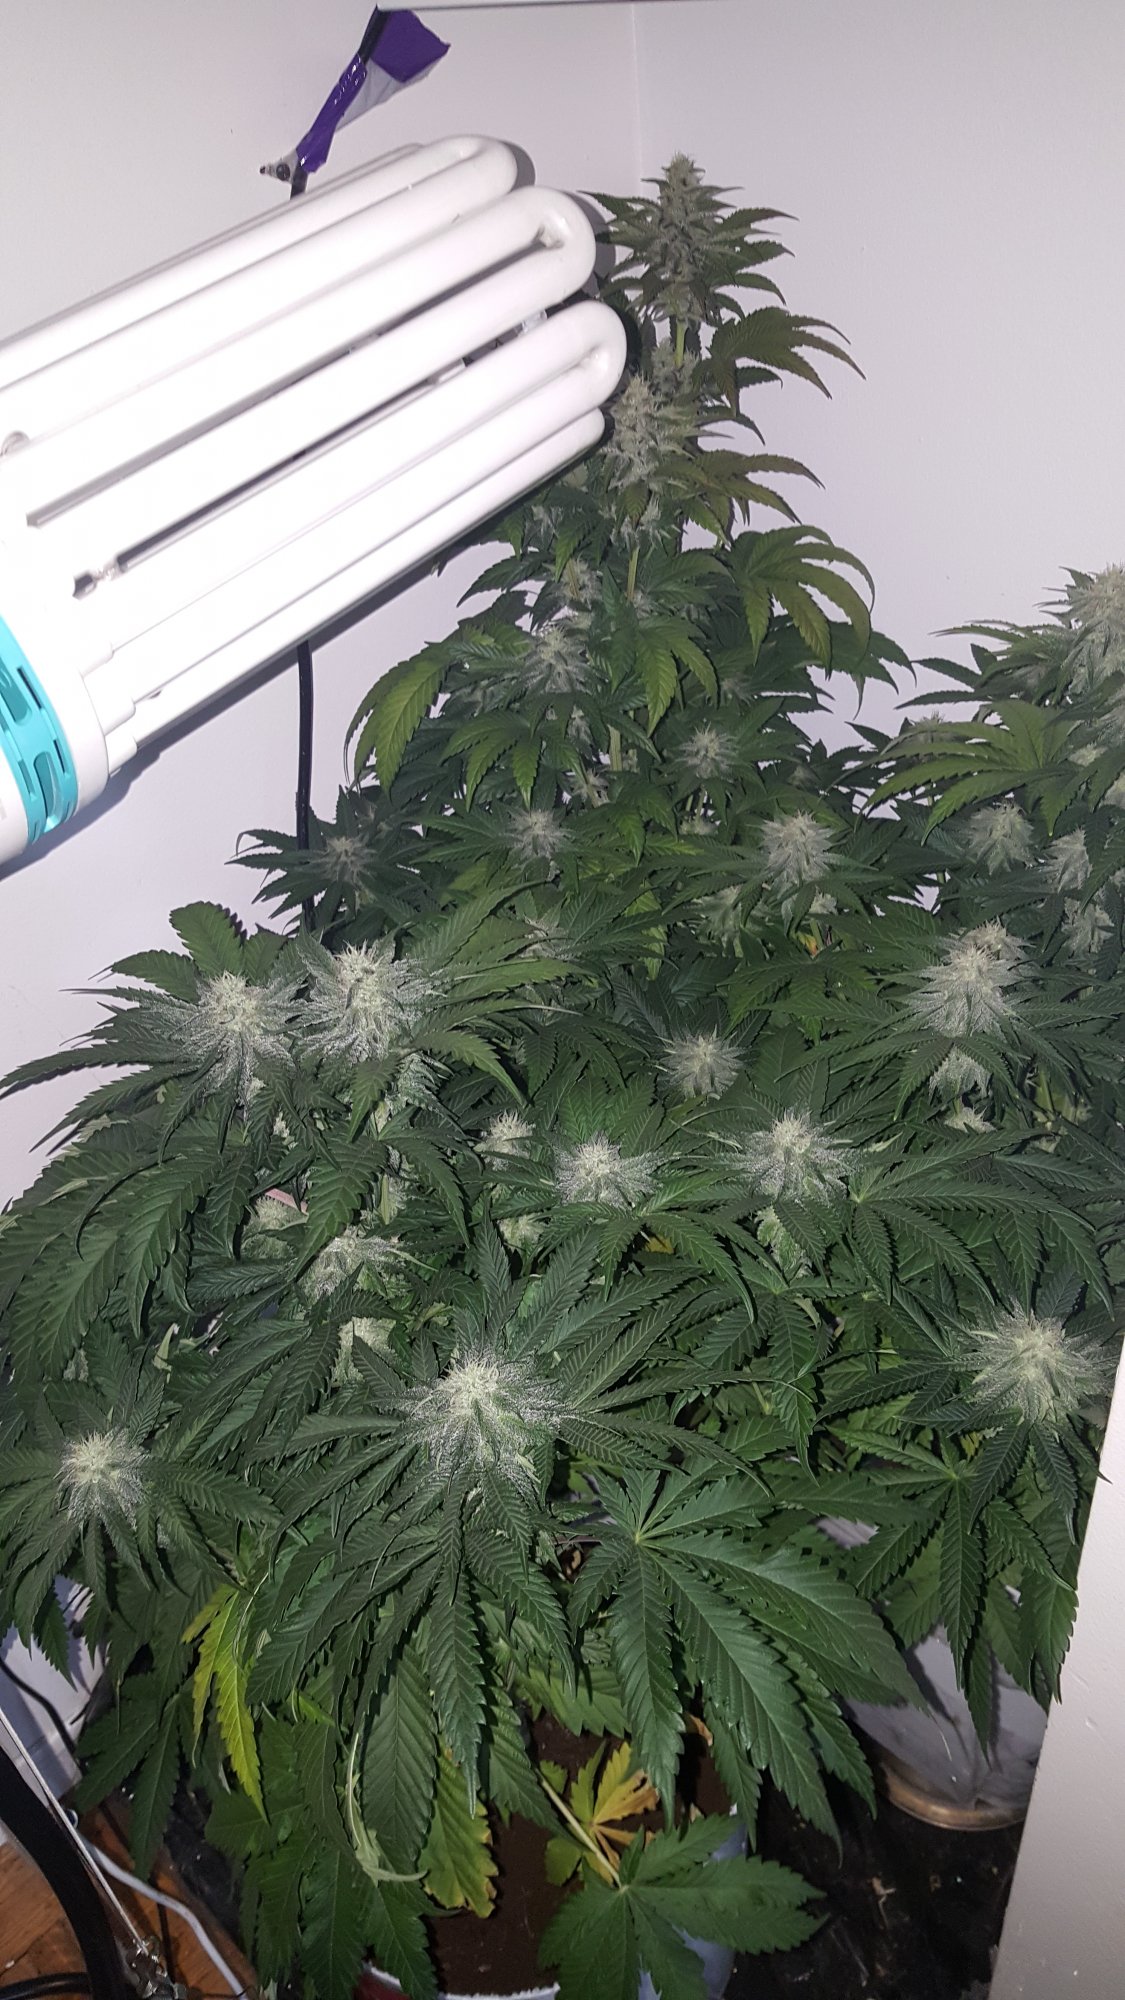 Week 6 of flower any tips or comments